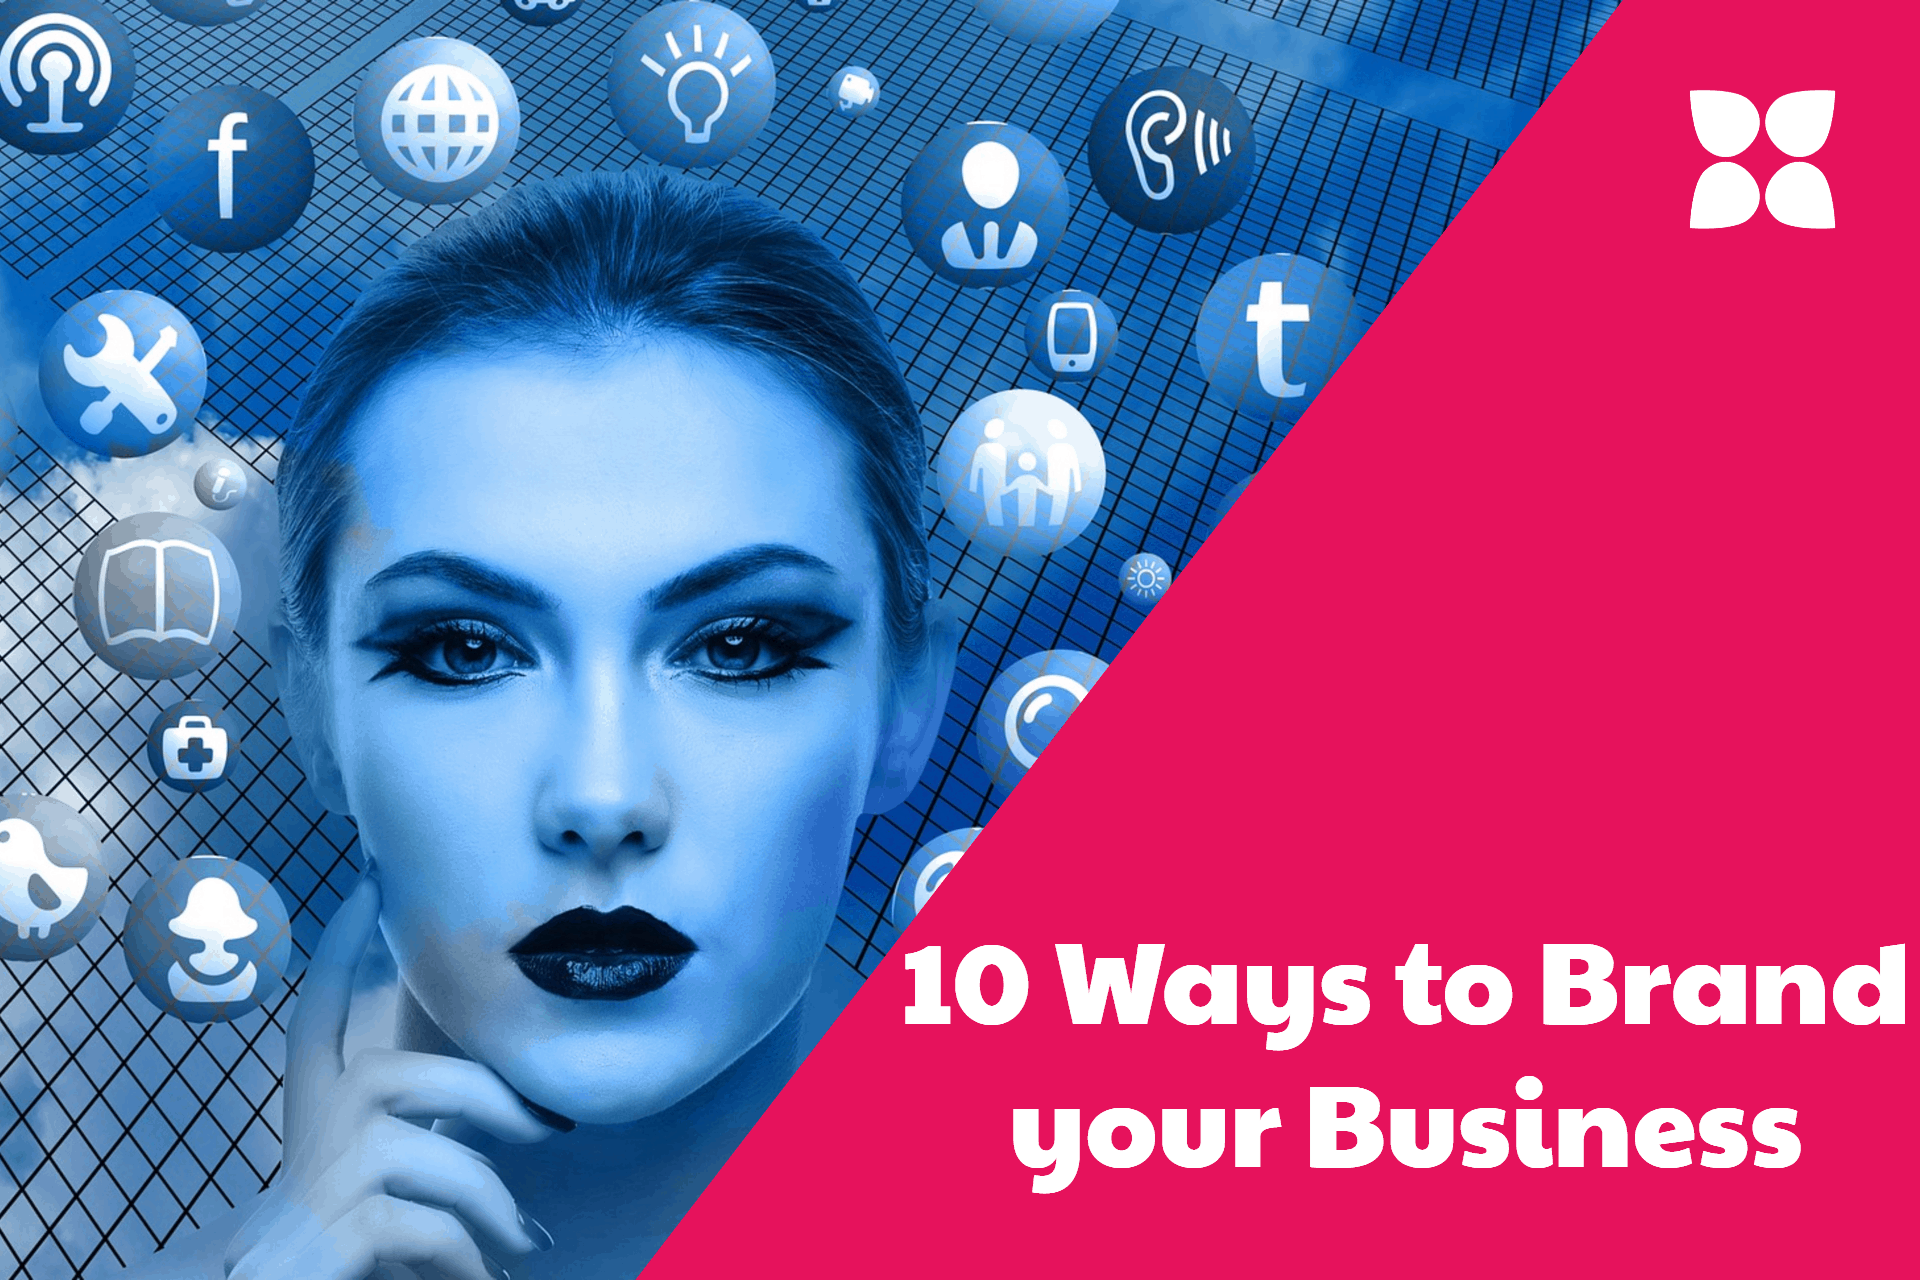 10 easy ways to brand your website, blog and social media images​